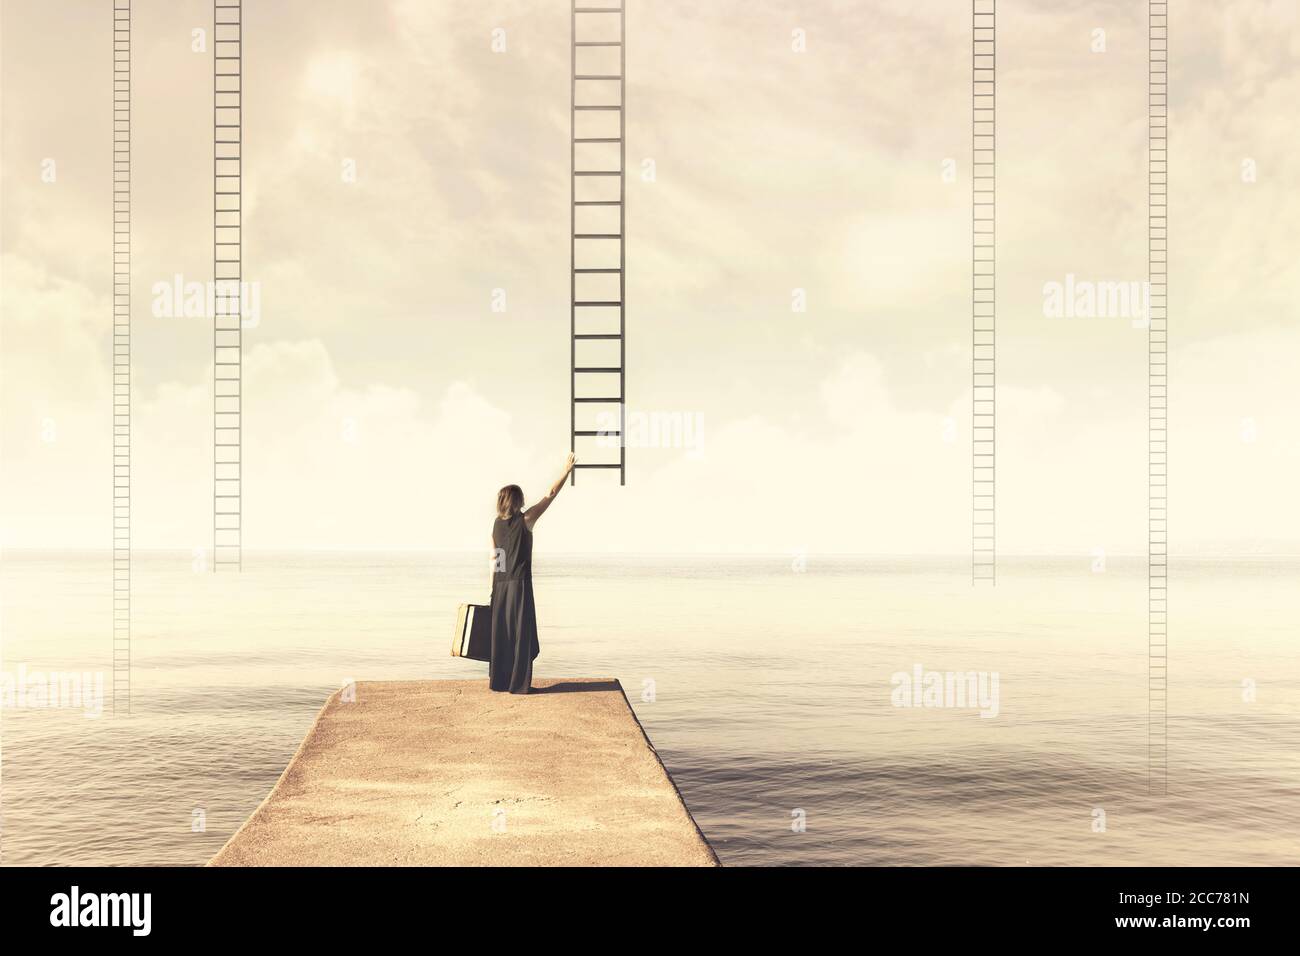 Woman chooses imaginary ladder from the sky to a disenchanted destination Stock Photo